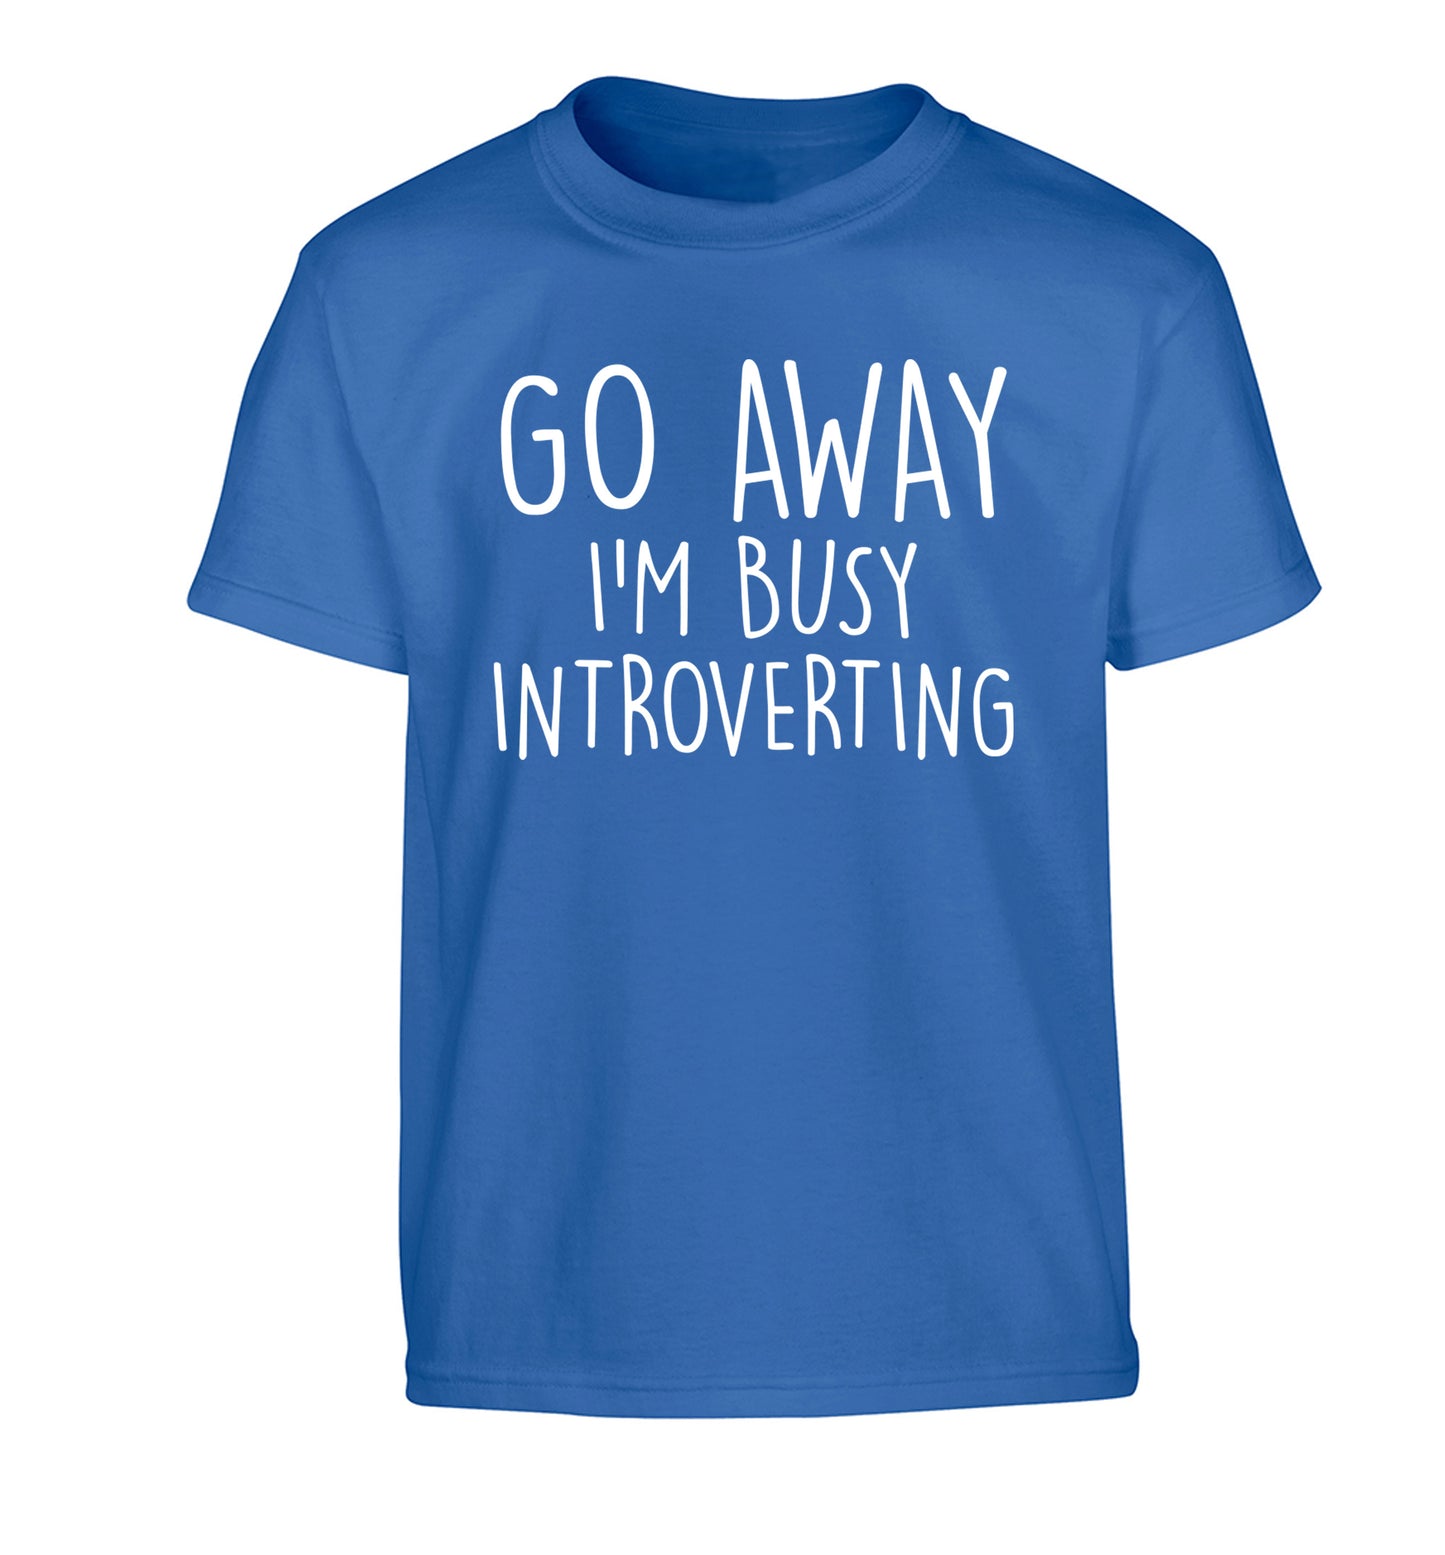 Go away I'm busy introverting Children's blue Tshirt 12-13 Years